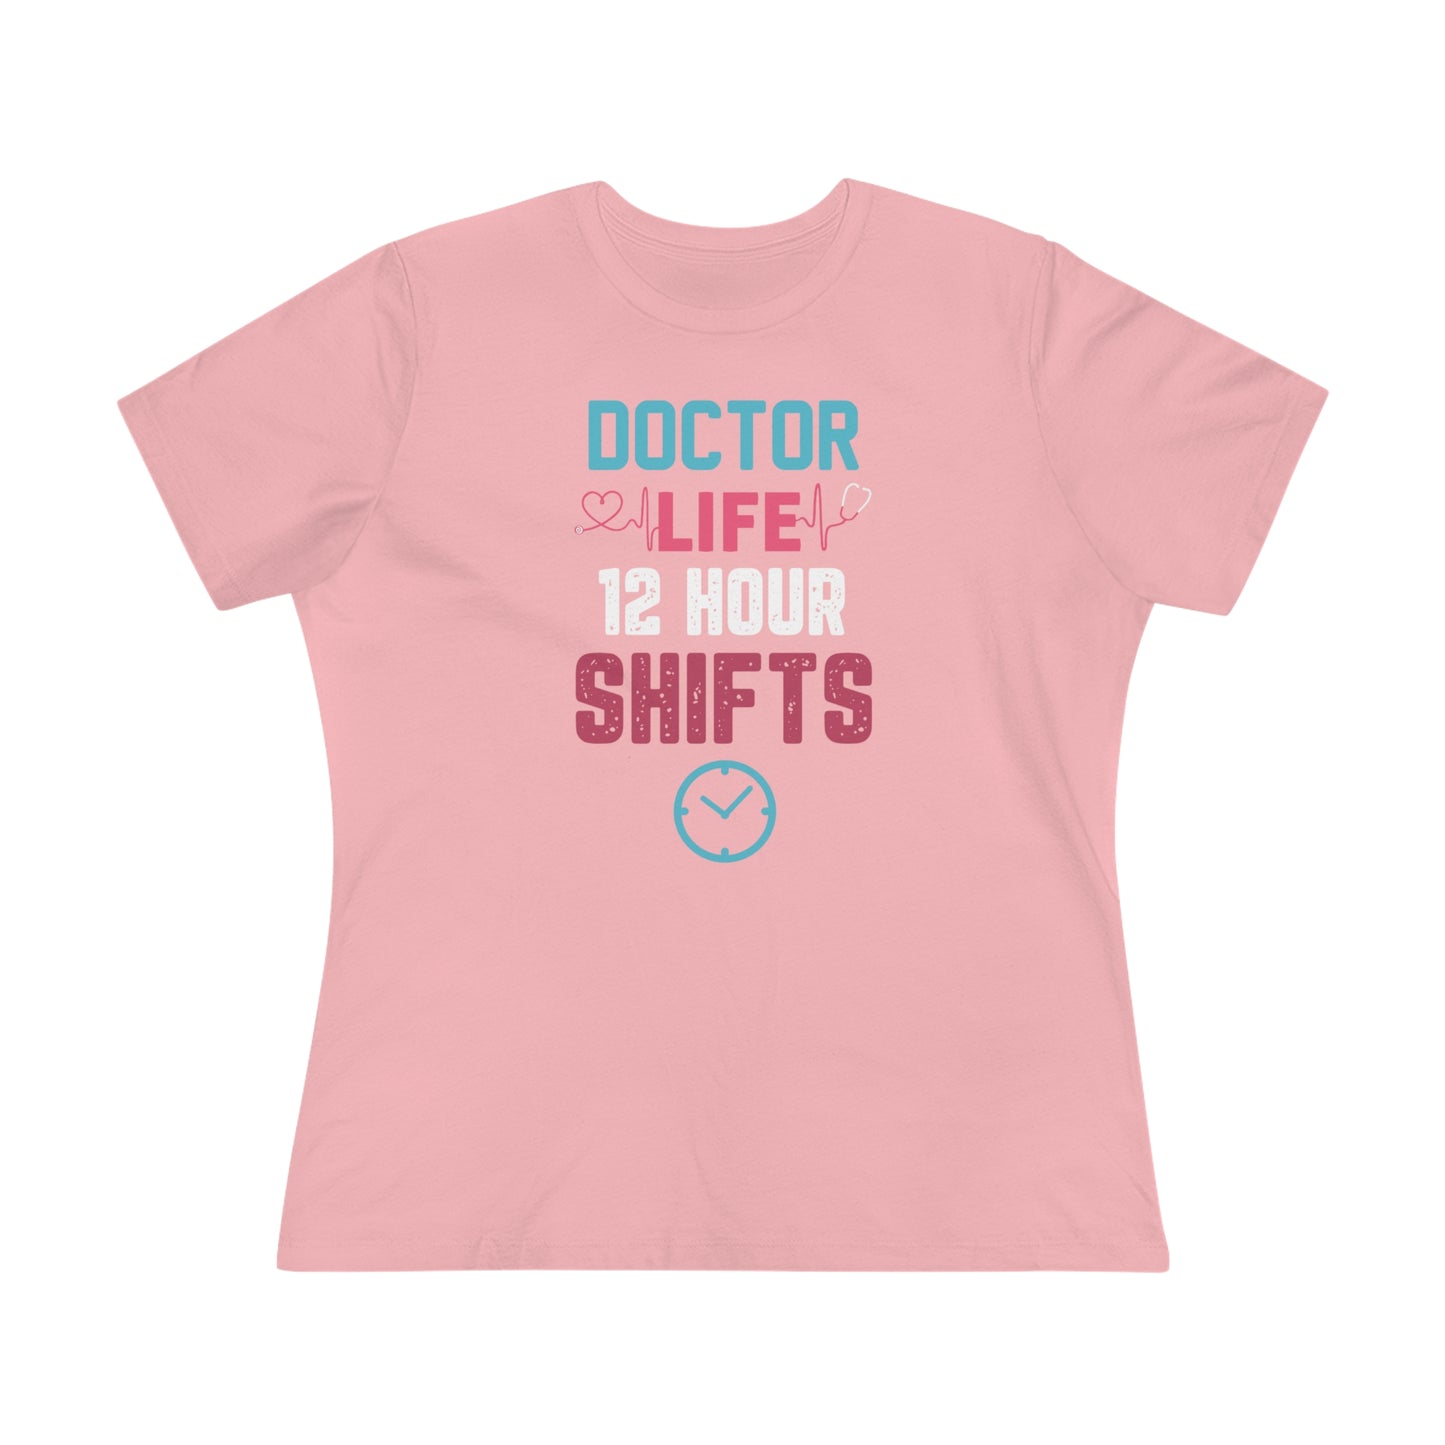 Doctor Life 12 Hour Shifts Women's Premium Tee, Doctor shirts, Doctor gift ideas, gift for doctors, women shirt with doctor design